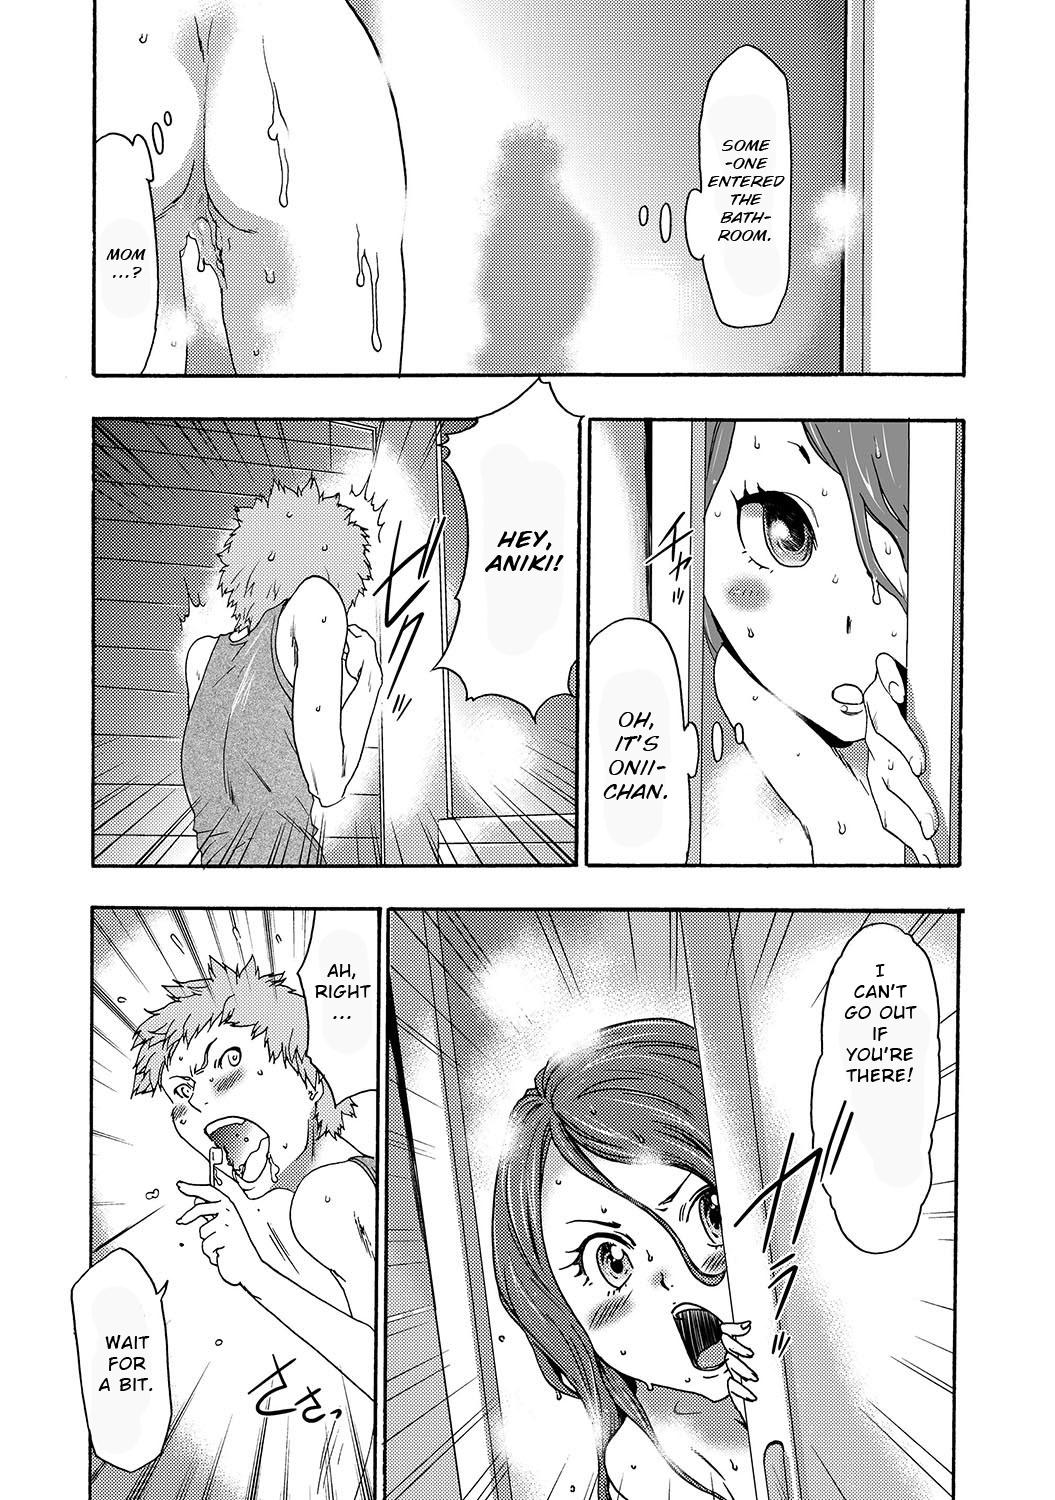 Girls Fucking Imouto Saimin Choukyou Manual | The Manual of Hypnotizing Your Sister Ch. 2 Ejaculations - Page 7